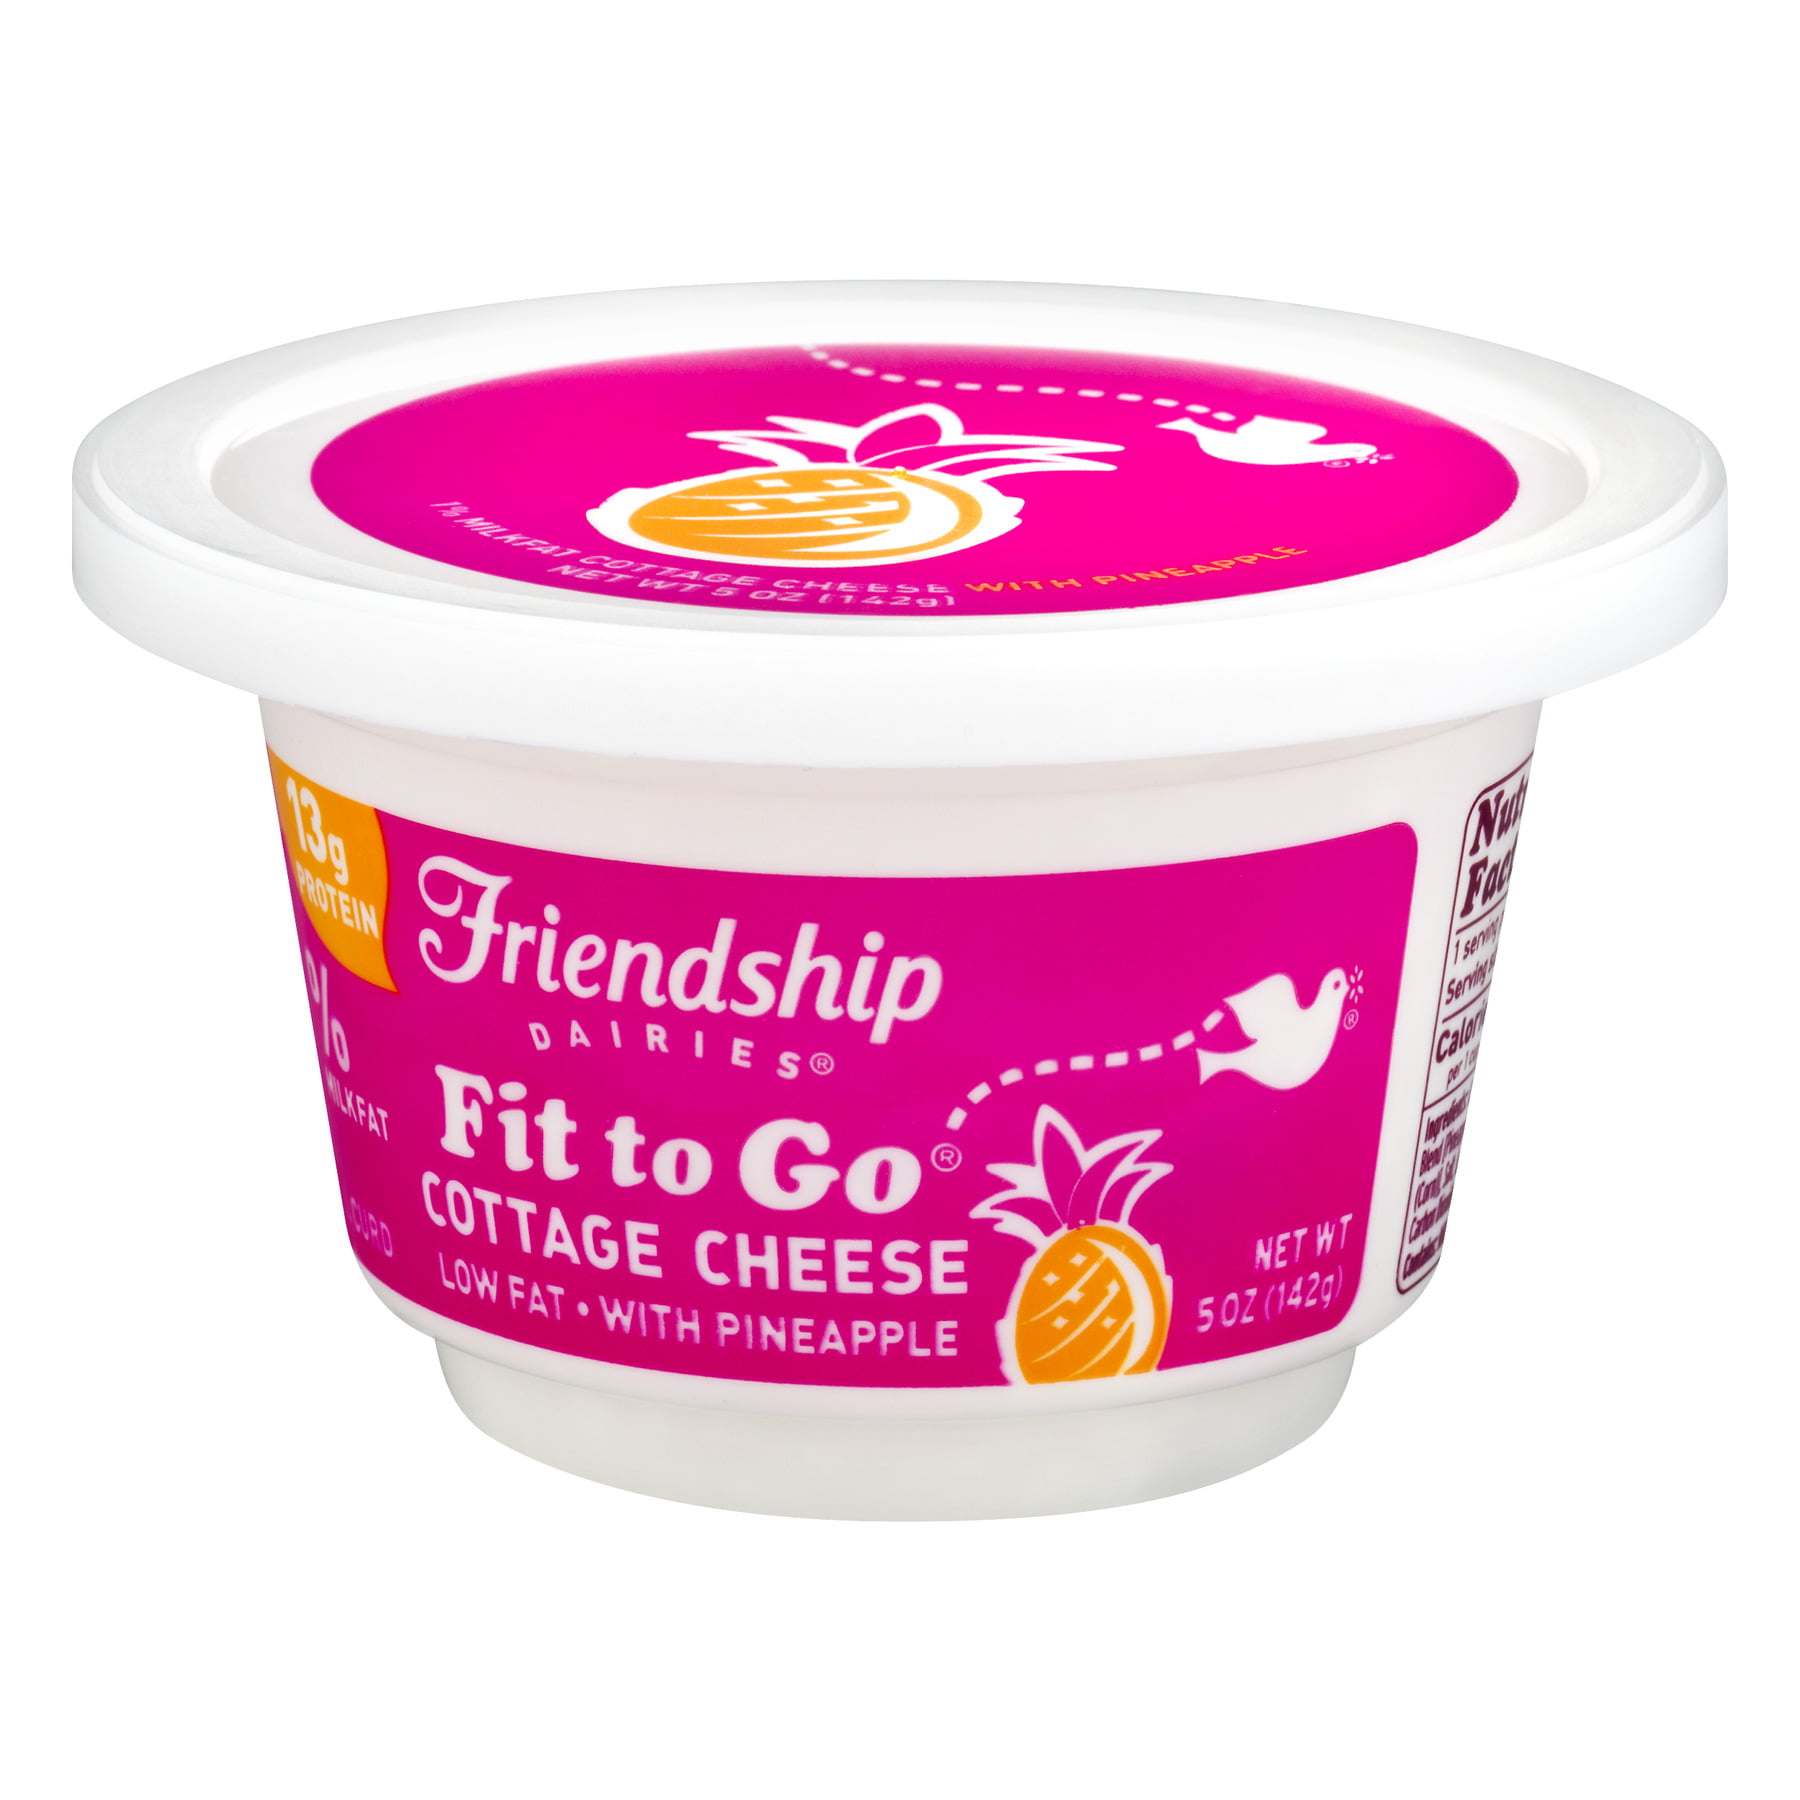 Friendship Dairies Fit To Go Low Fat Small Curd With Pineapple